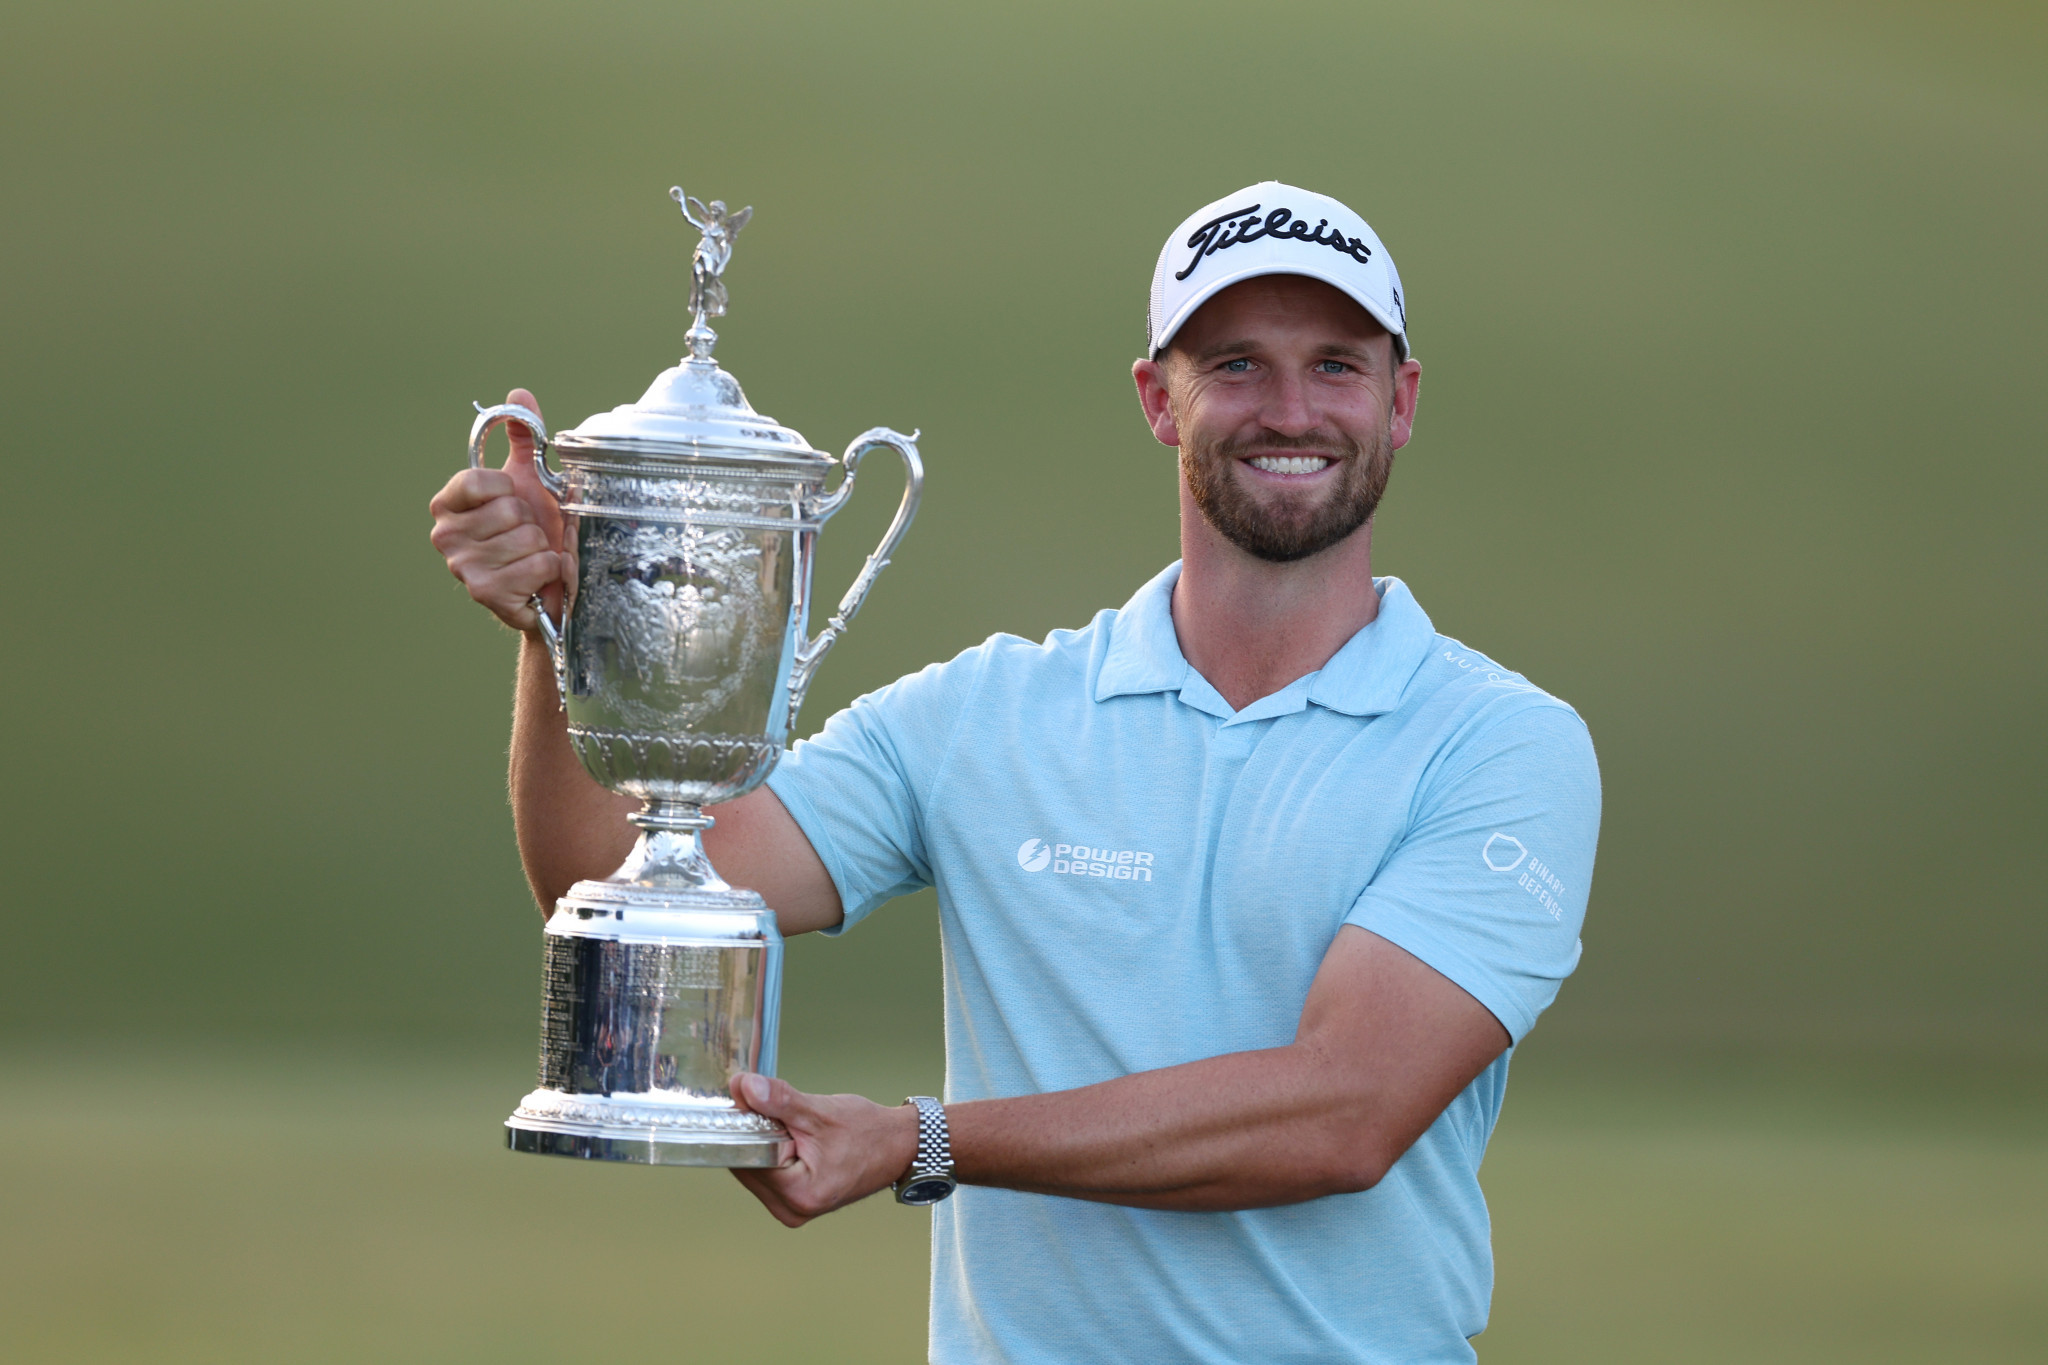 Clark holds off McIlroy to win first major at U.S. Open in Hollywood ending